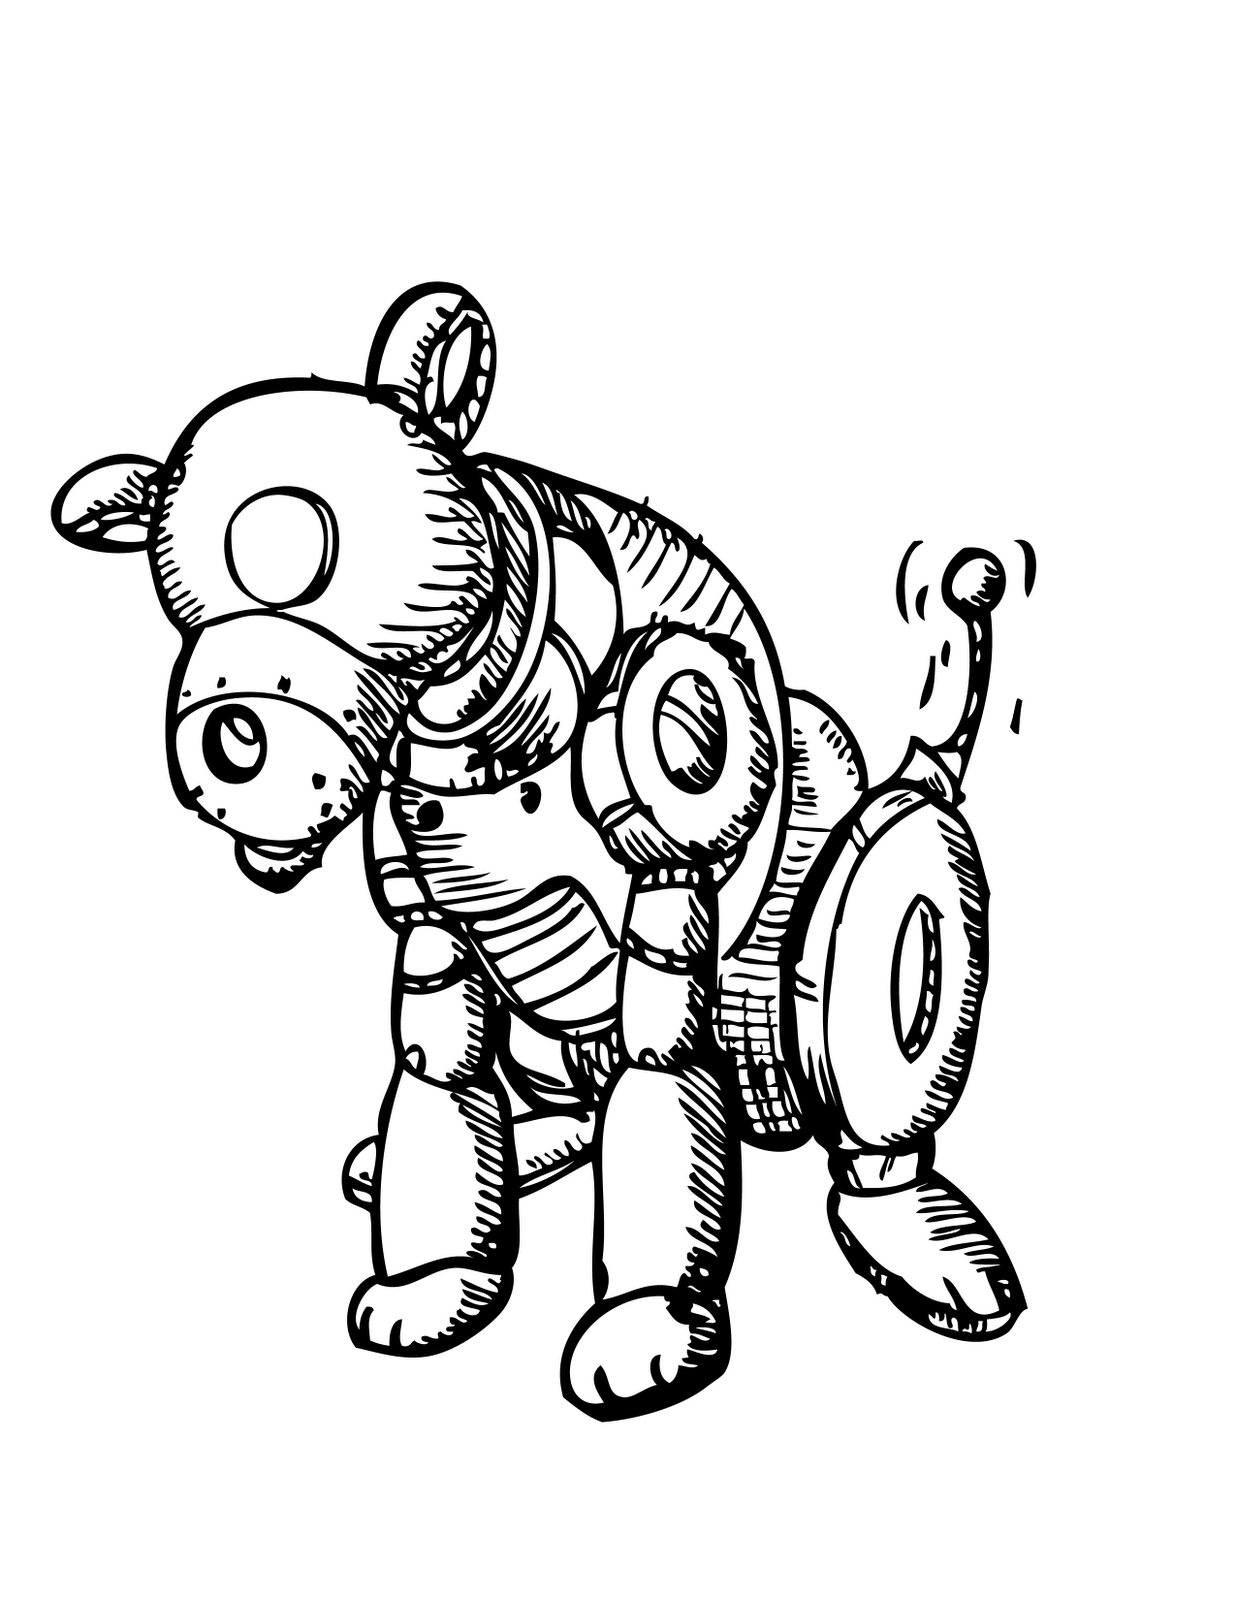 Simple Robot Dog Drawings Sketch Coloring Page